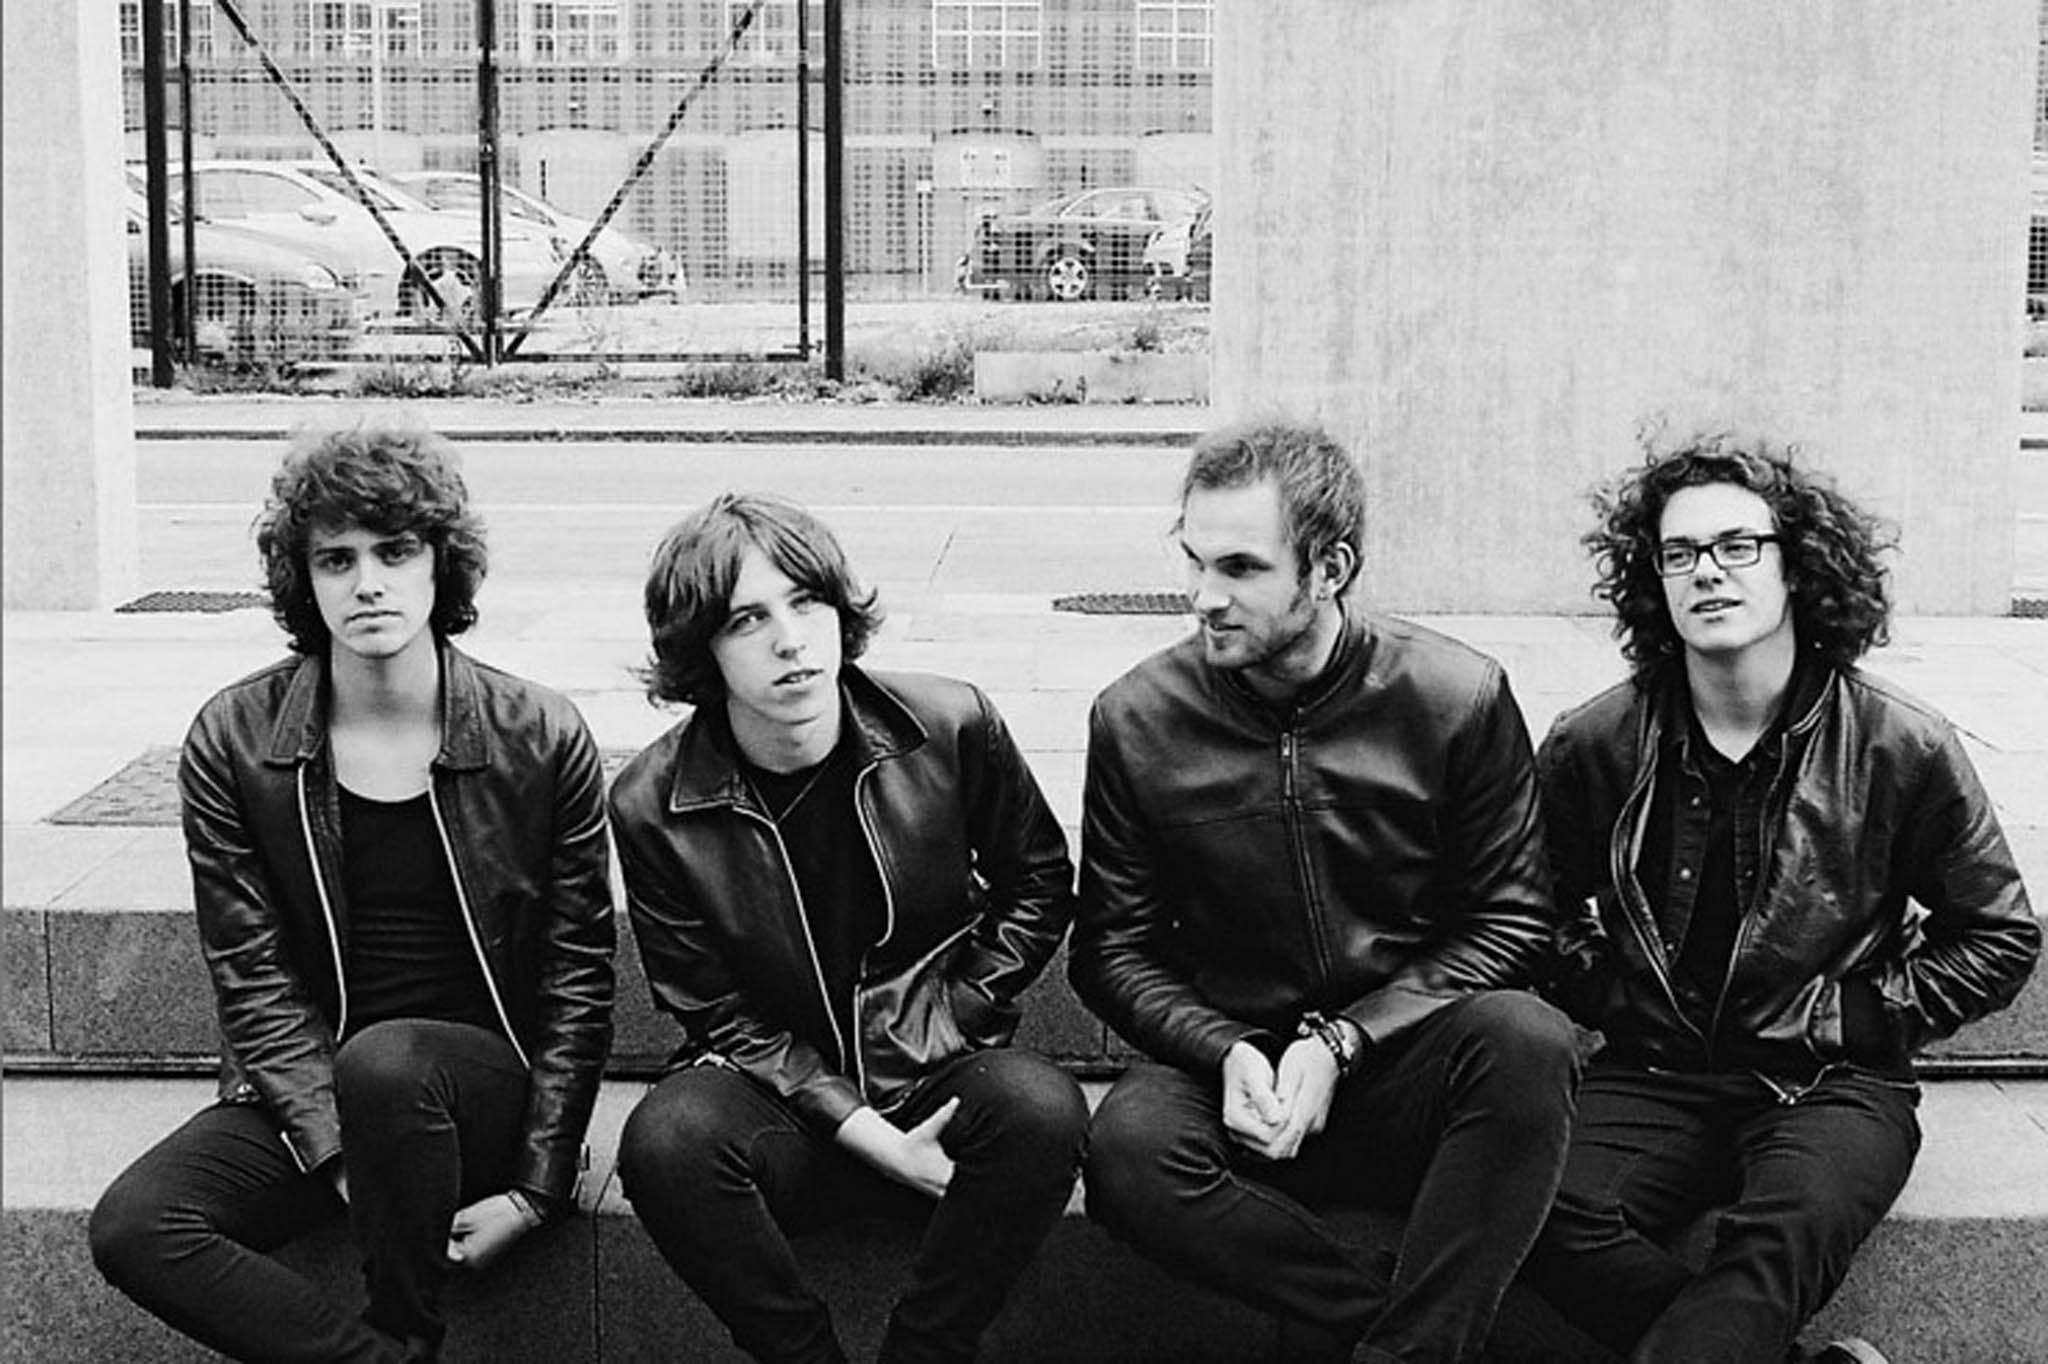 Rock band Catfish and the Bottlemen from North Wales